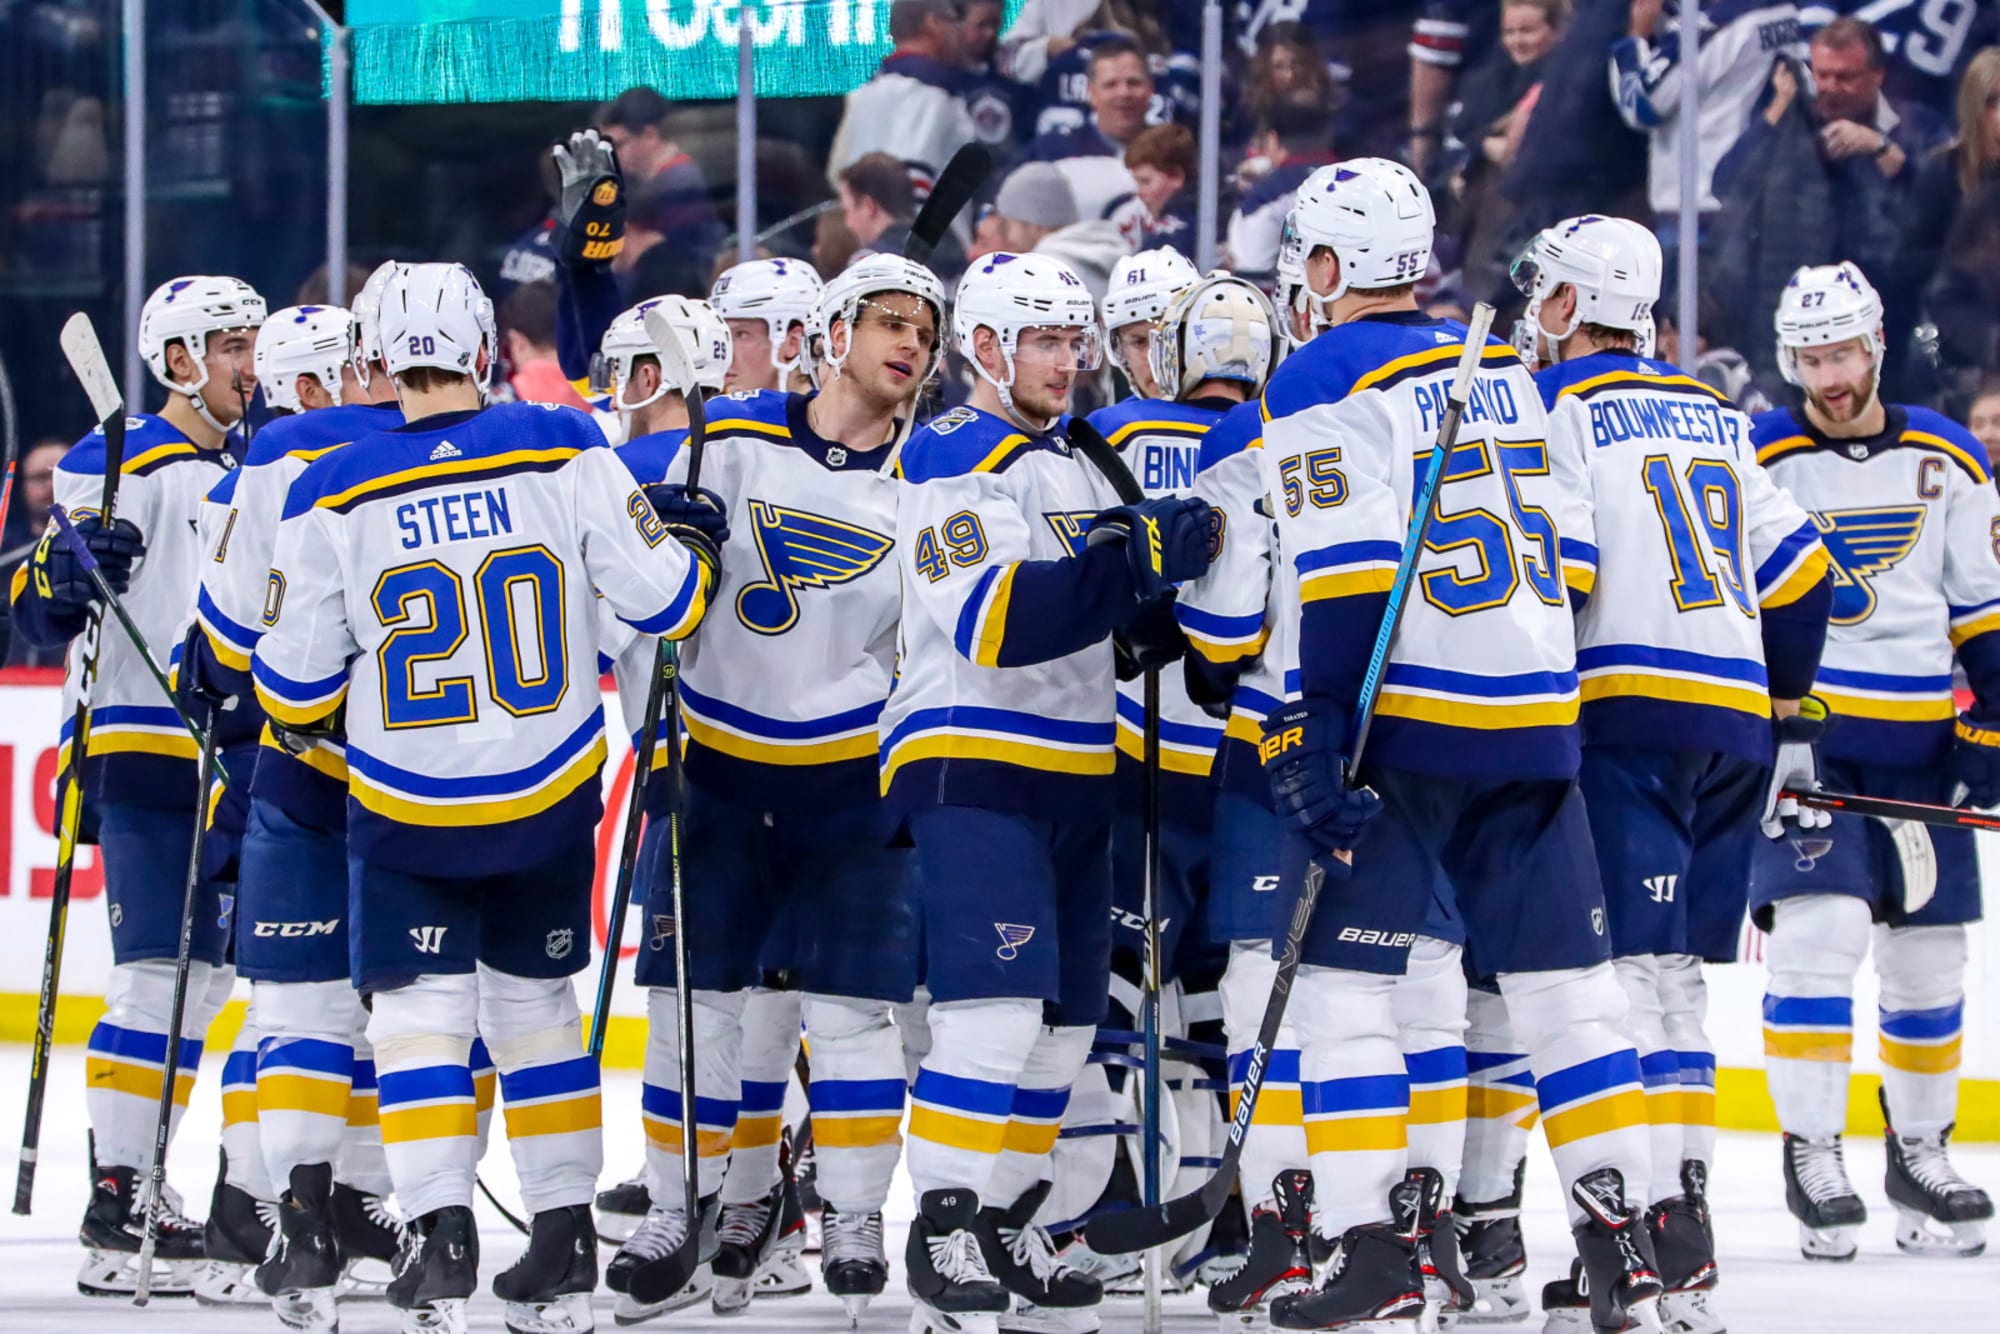 St. Louis Blues Proving They Are Among The NHL Elite